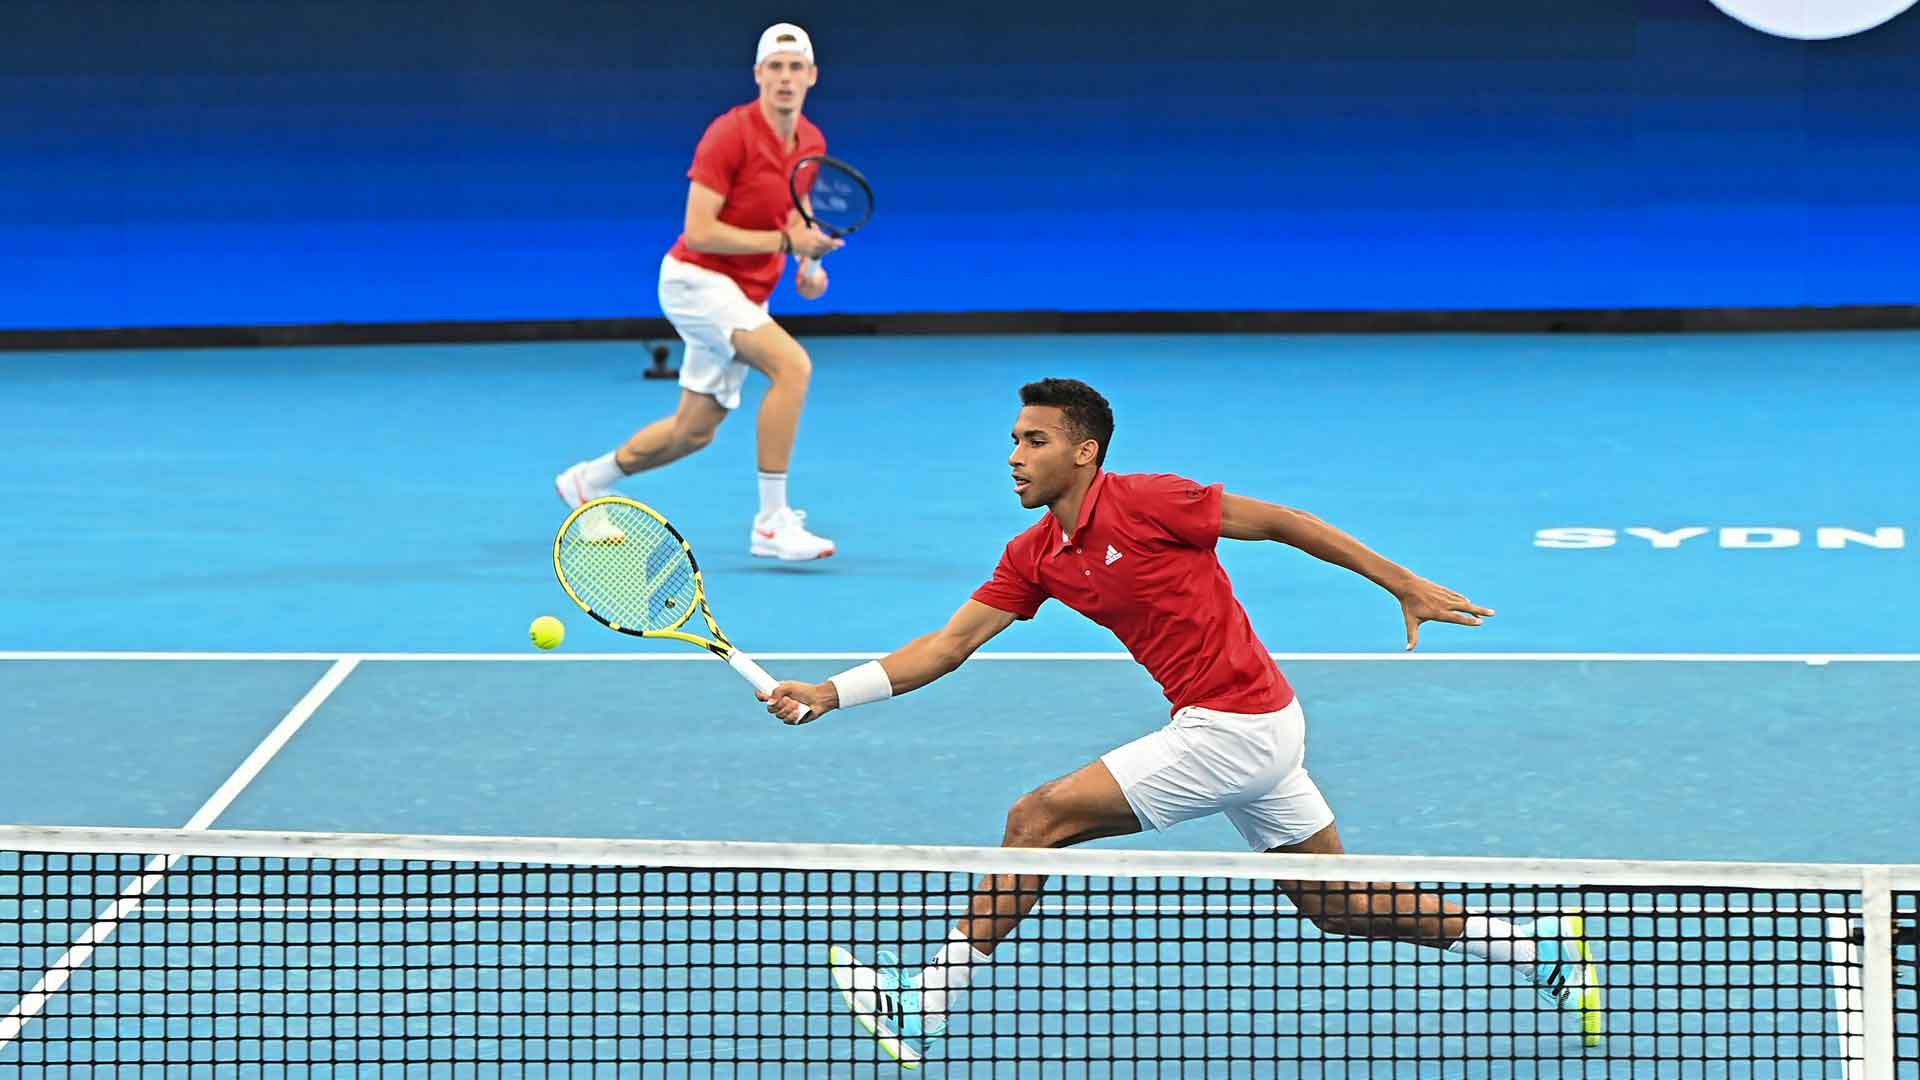 Felix Auger-Aliassime and Denis Shapovalov are teaming up at the year's first ATP Masters 1000.